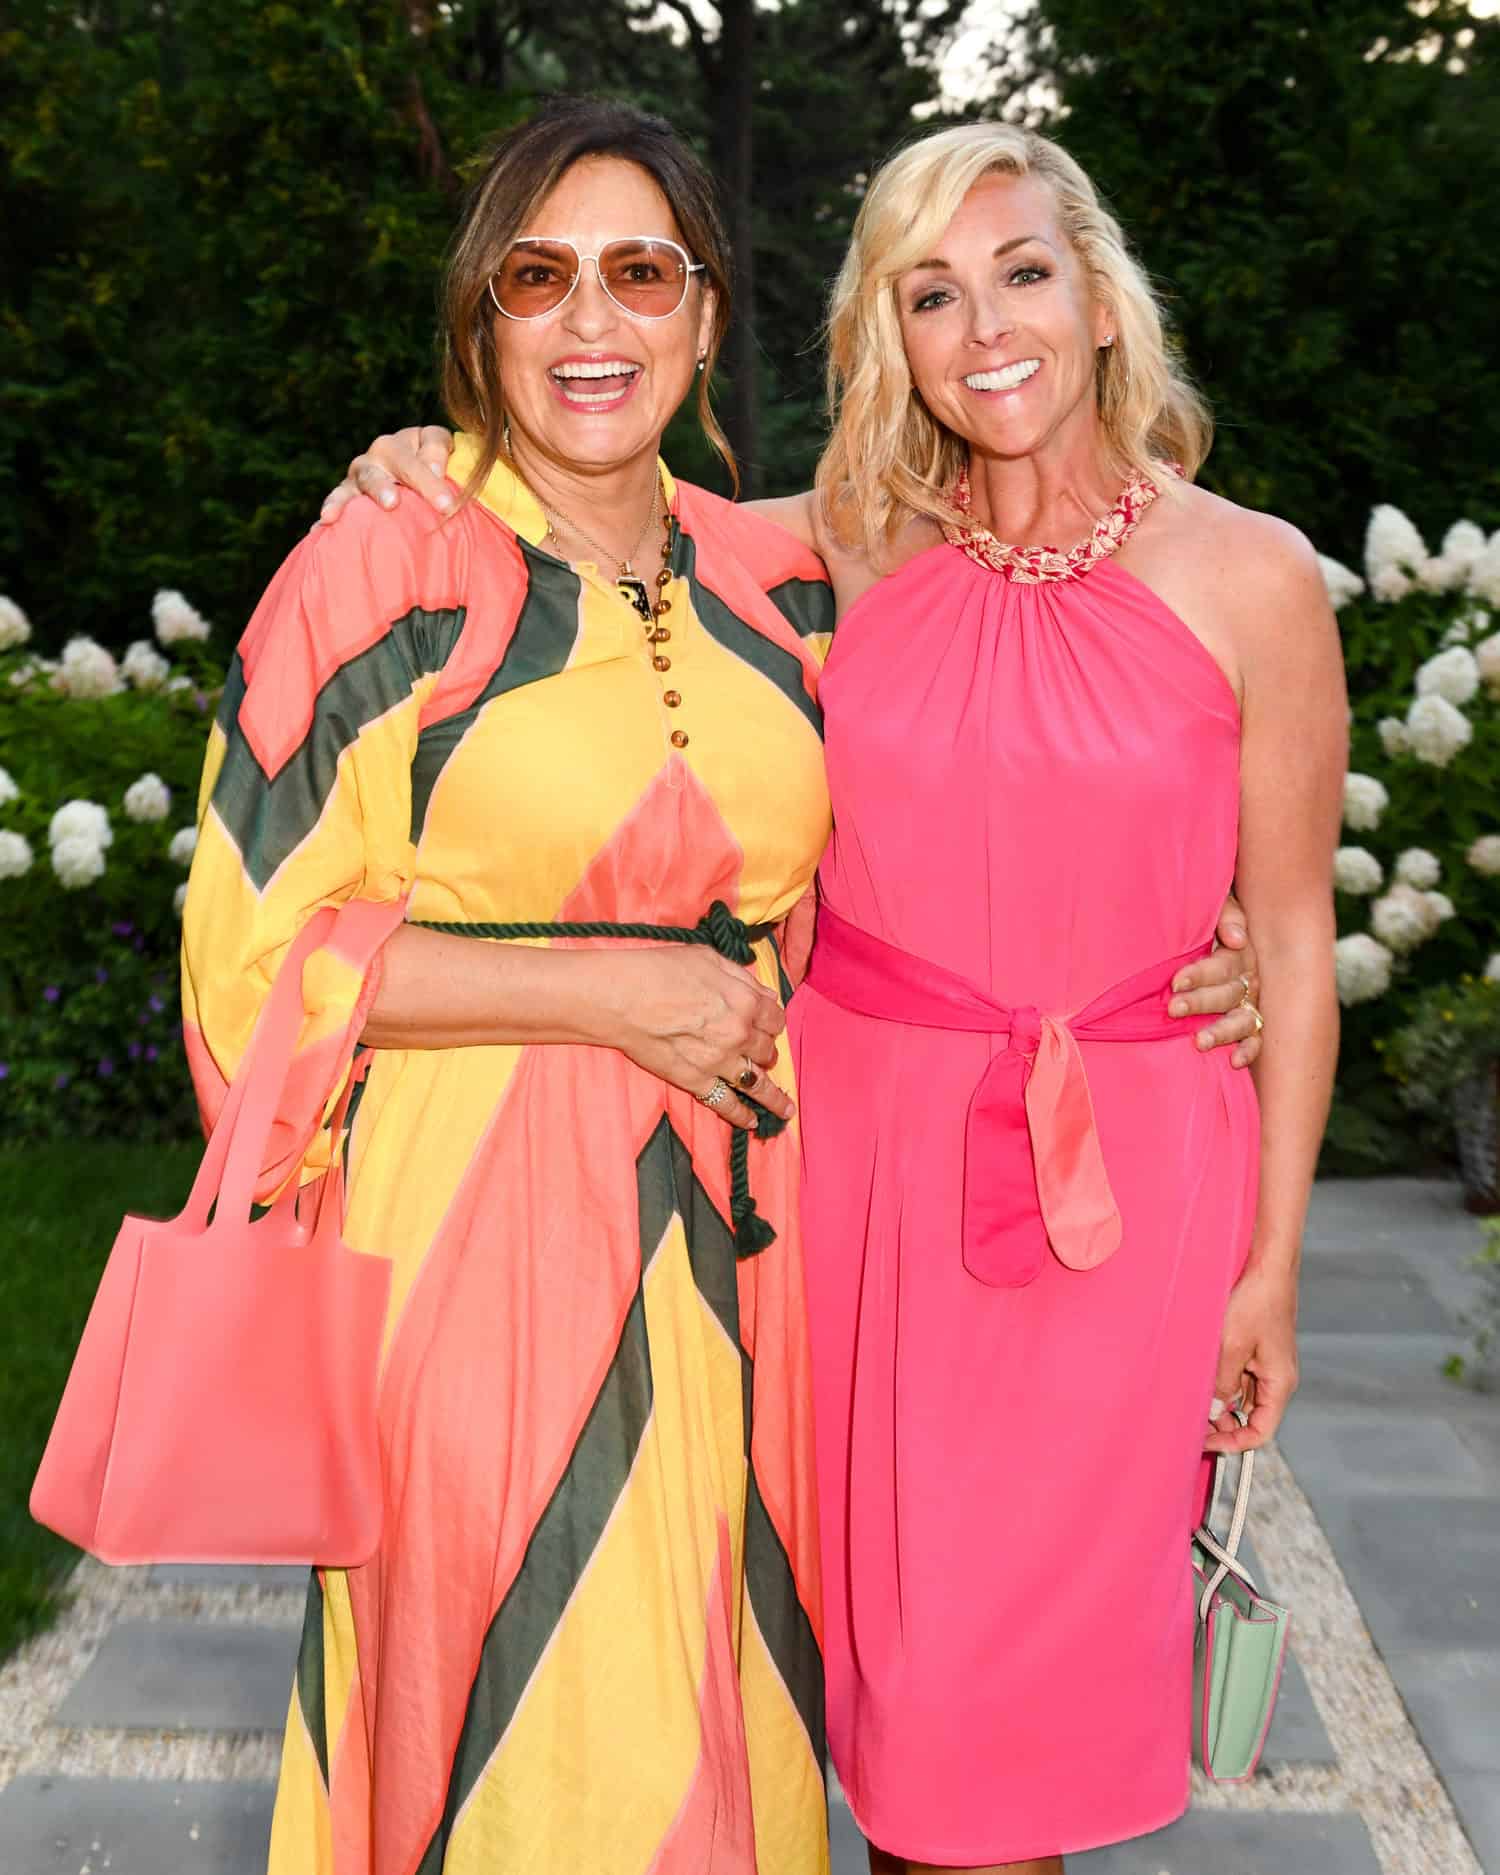 Rachel Zoe attends Erin and Sara Foster's VIP Hamptons party to